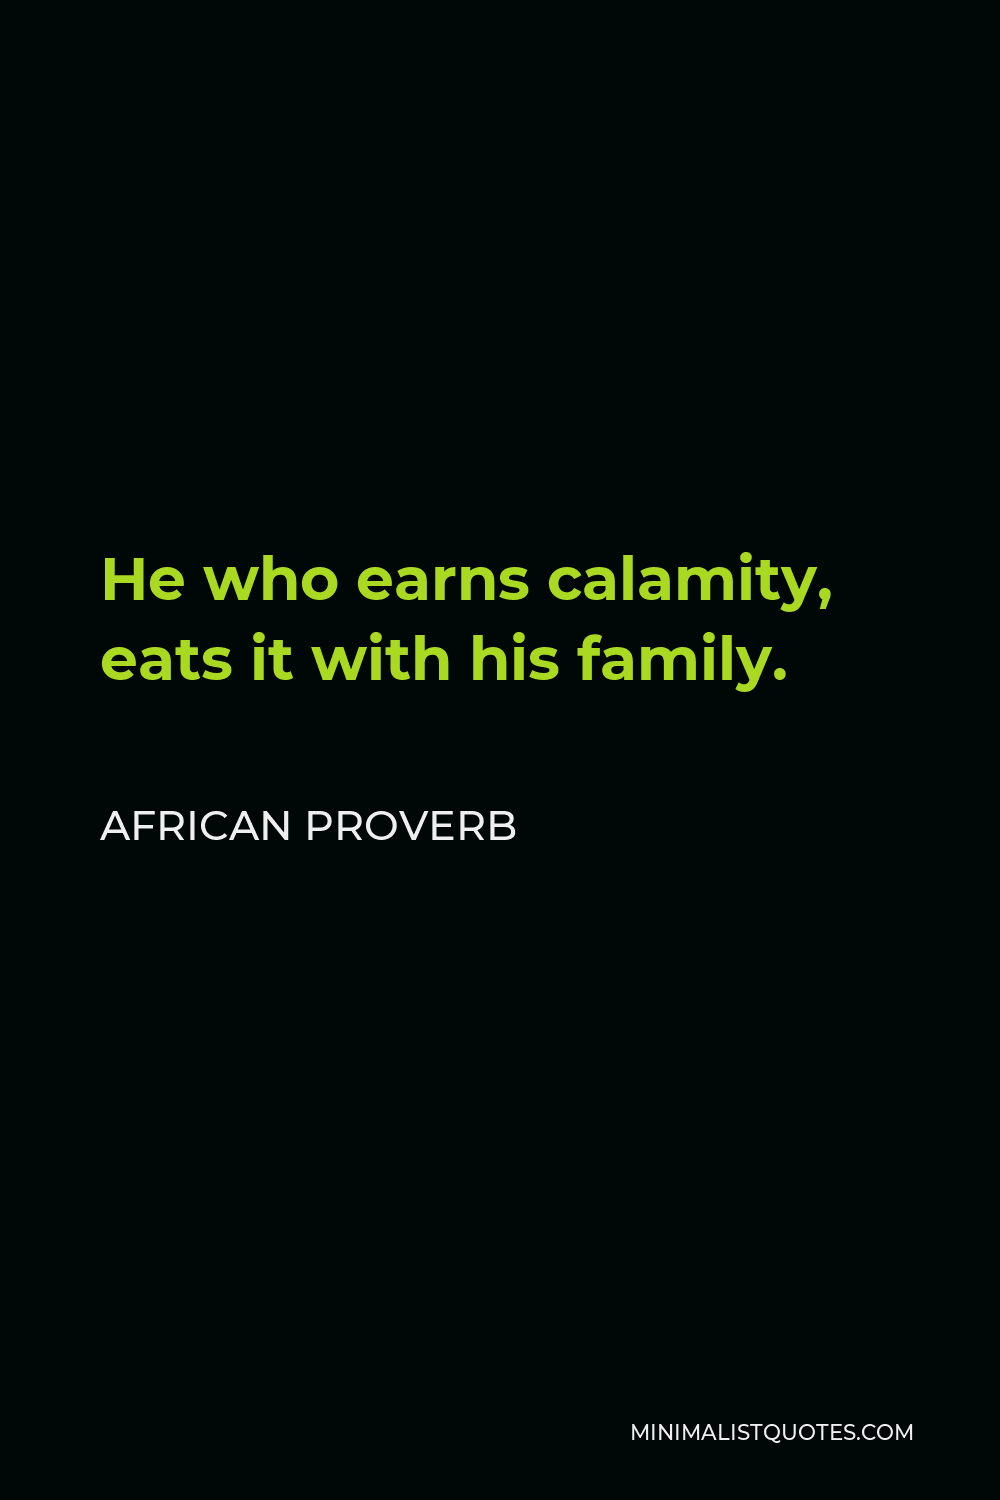 African Proverb Quote - He who earns calamity, eats it with his family.